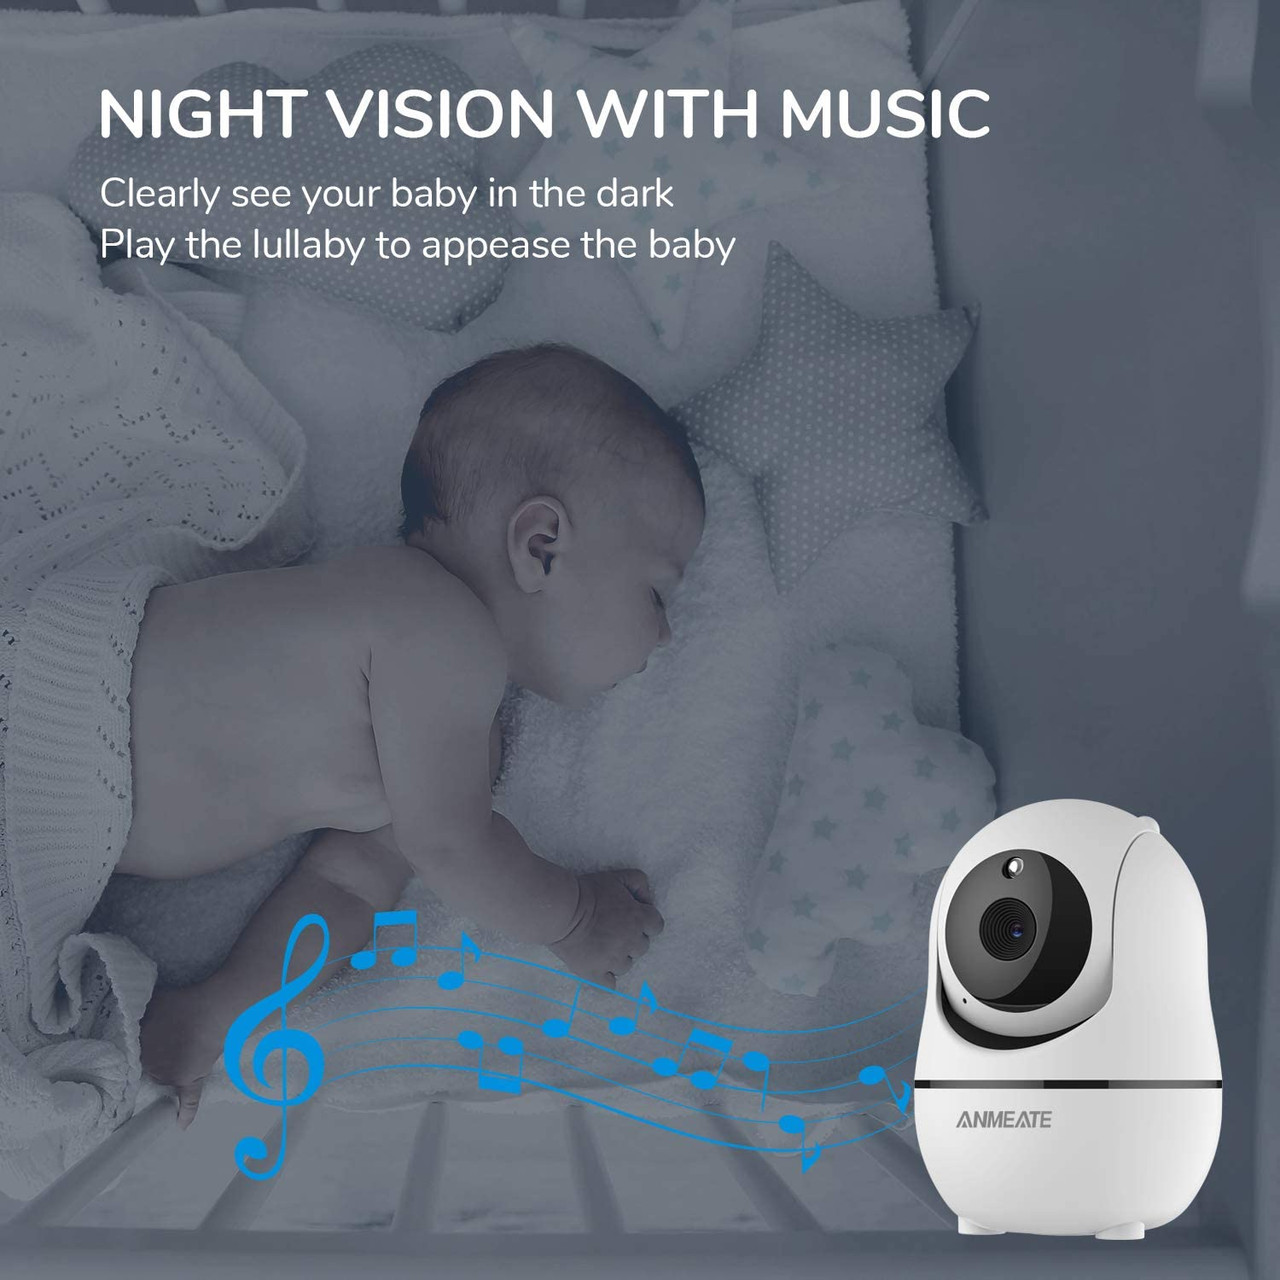 Baby Monitor with Remote Pan-Tilt-Zoom Camera, 3.5” Large Display Video  Baby Monitor with Camera and Audio |Infrared Night Vision |Two Way Talk  Room Temperature| Lullabies and 960ft Range